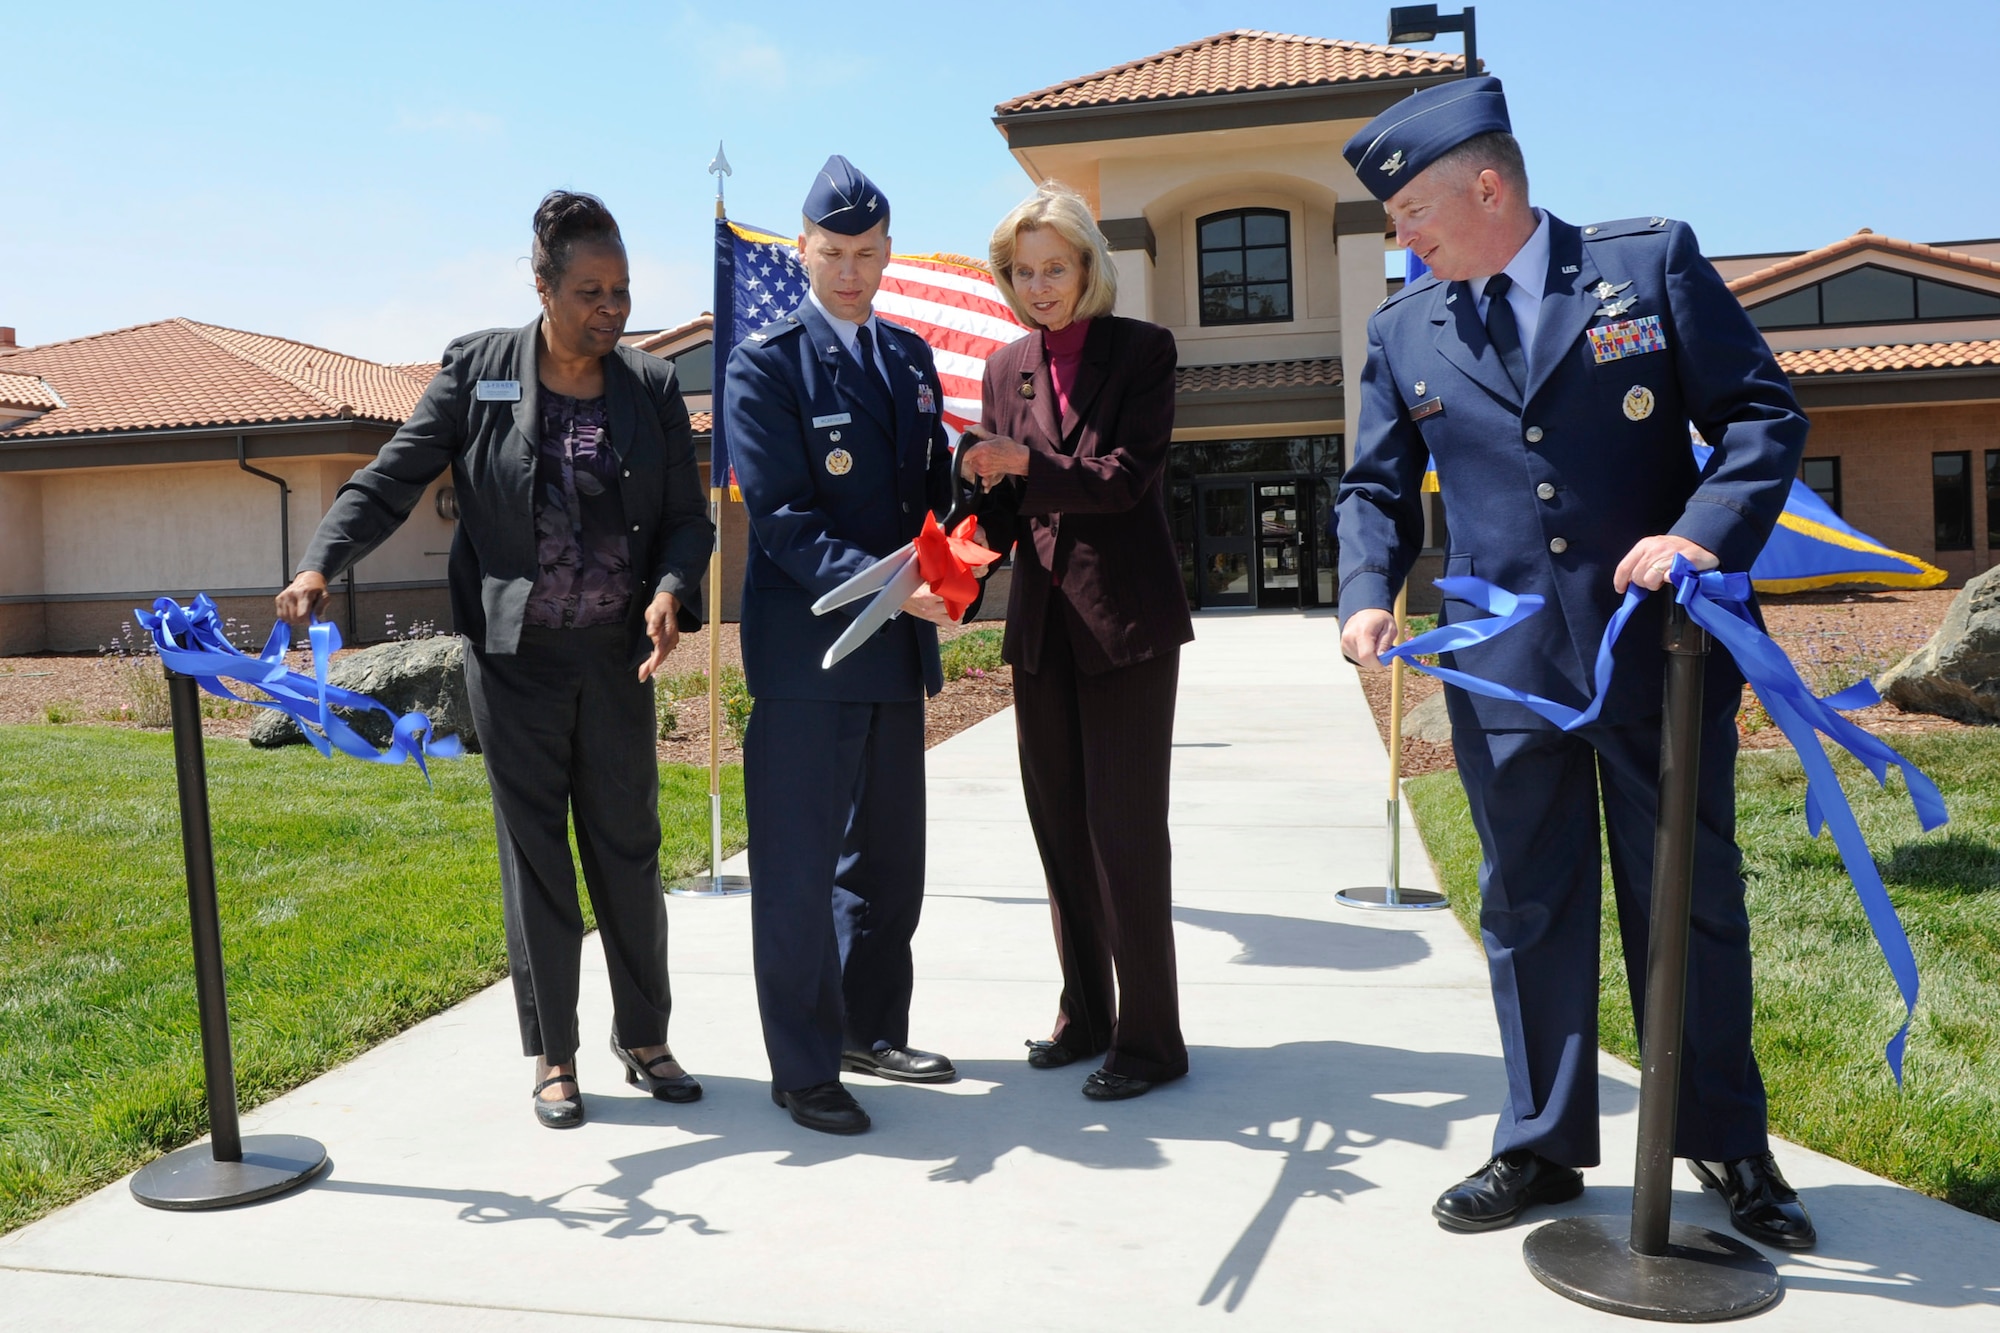 VANDENBERG AIR FORCE BASE, Calif.-- Verna Brown, Vandenberg Child Development Center director, Col. Pail McArthur, 30th Space Wing vice commander, U.S. Congresswoman Lois Capps and Col. Kelly Kirts, 30th Mission Support Group commander, cut the ribbon to the new Child Development Center here Friday, May 11th, 2012. (U.S. Air Force photo/Staff Sgt. Levi Riendeau)